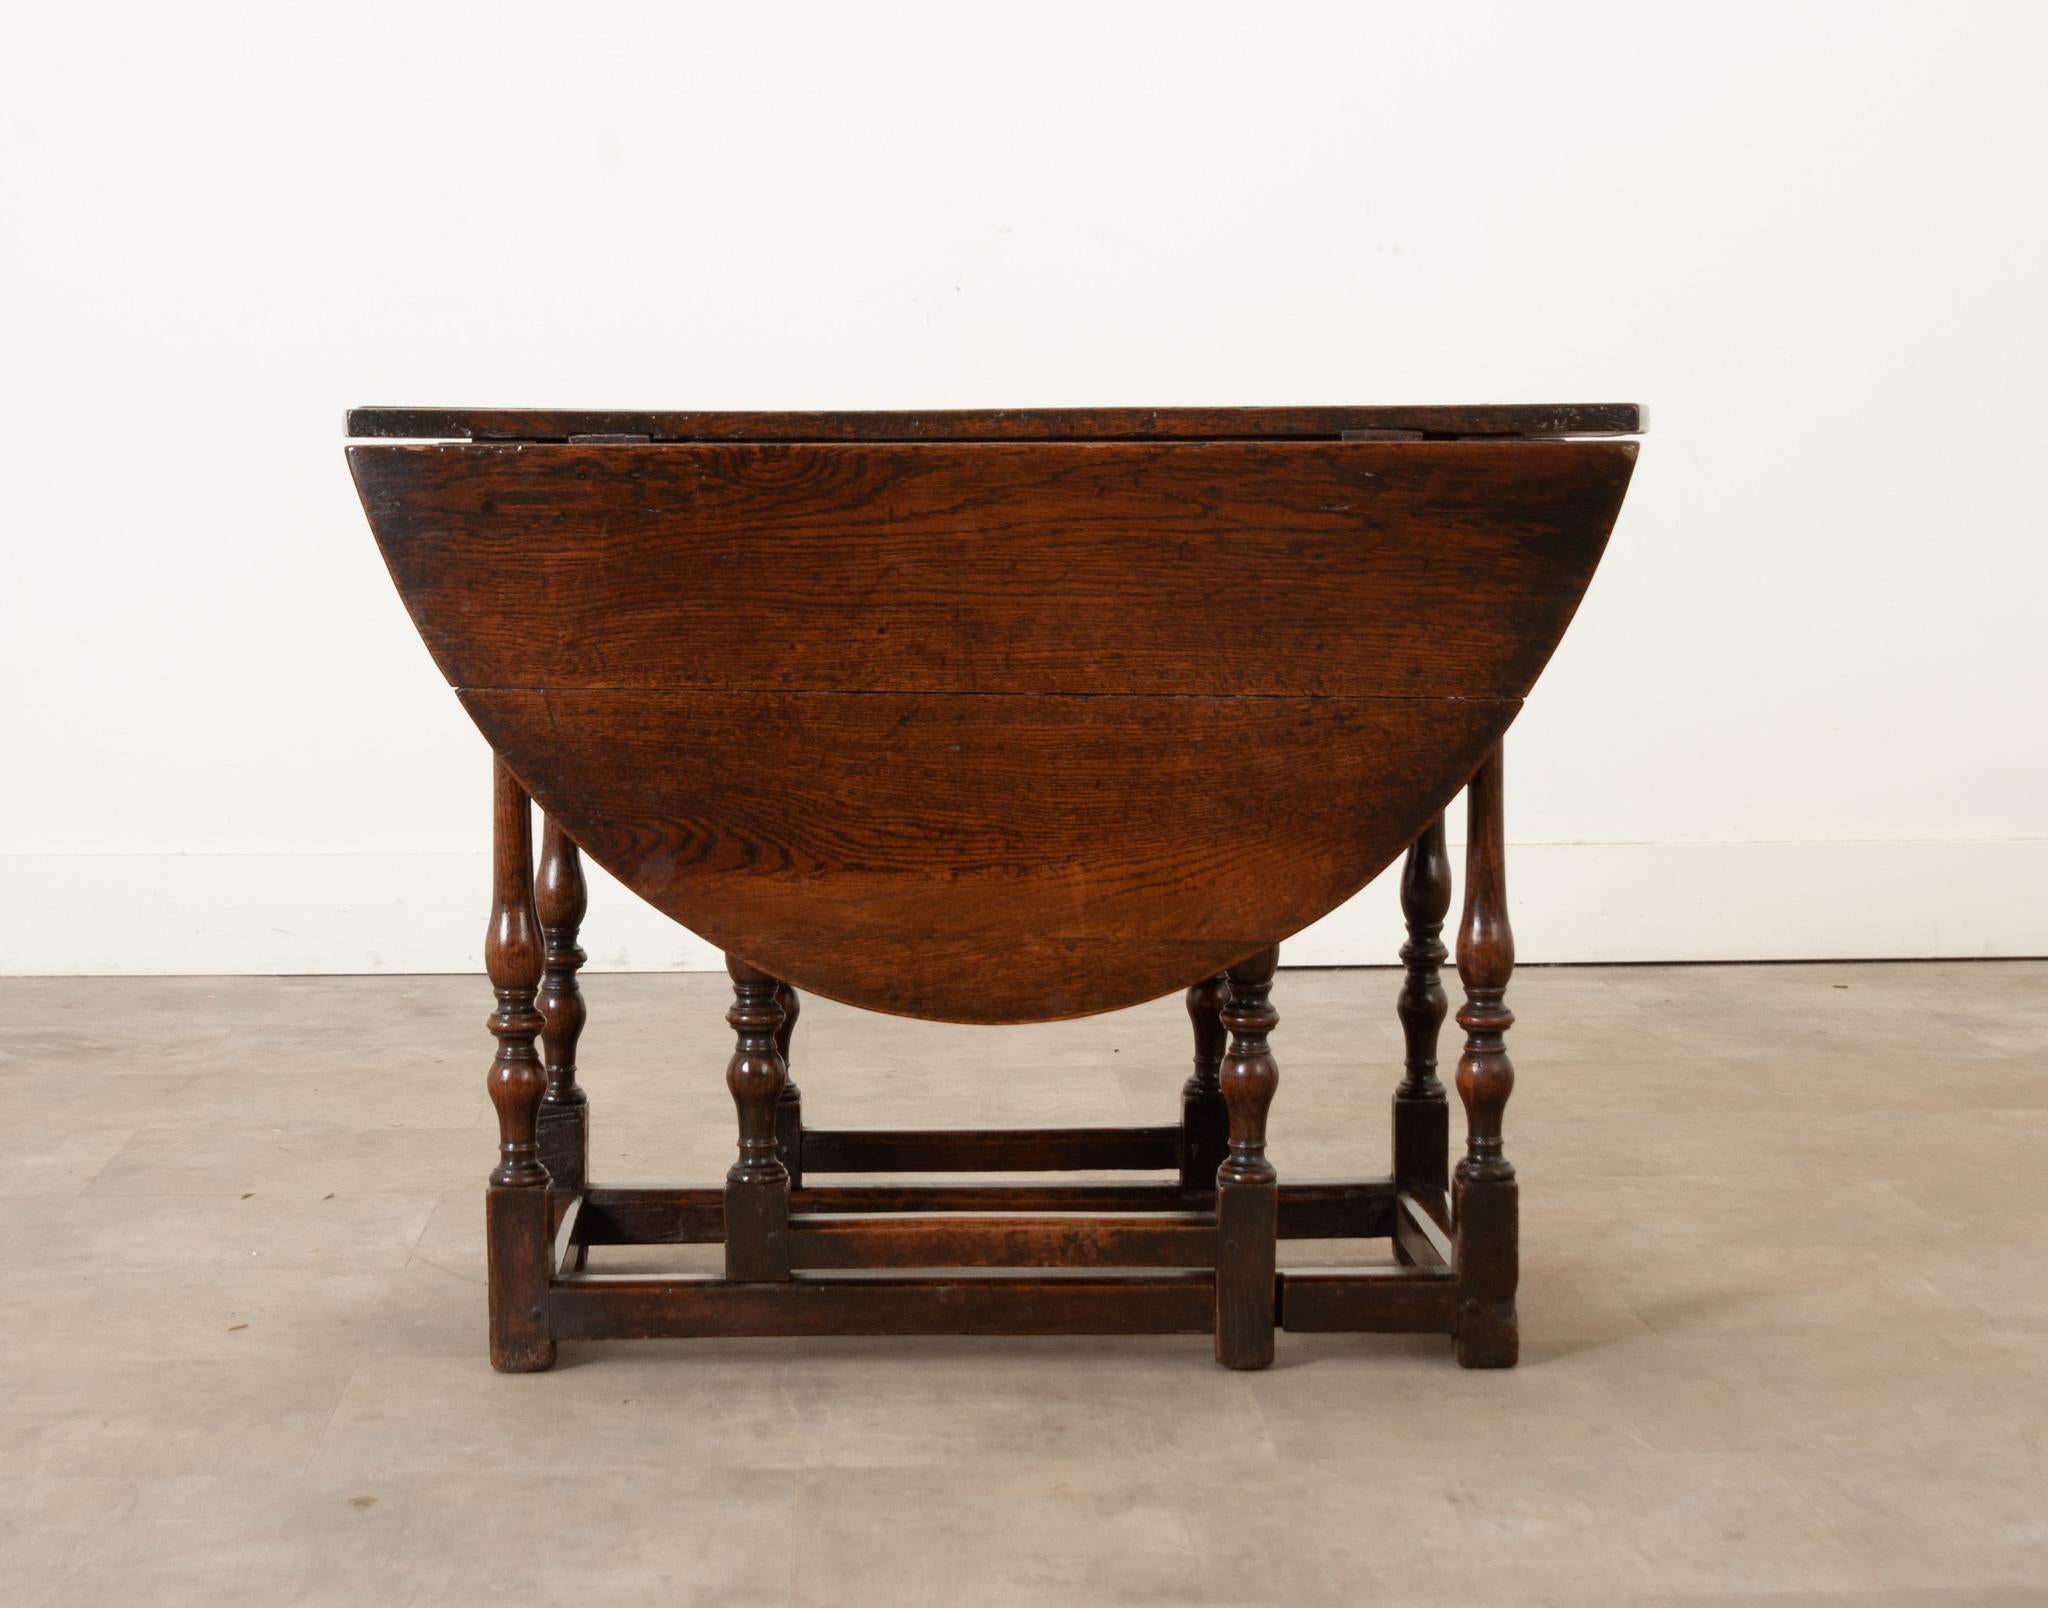 English 18th Century solid oak gateleg table. This table boosts charm and patina only possible with its age and construction. The table is held together with peg joinery and hand cut steel hinges. The oval drop leaf table top is connected to turned